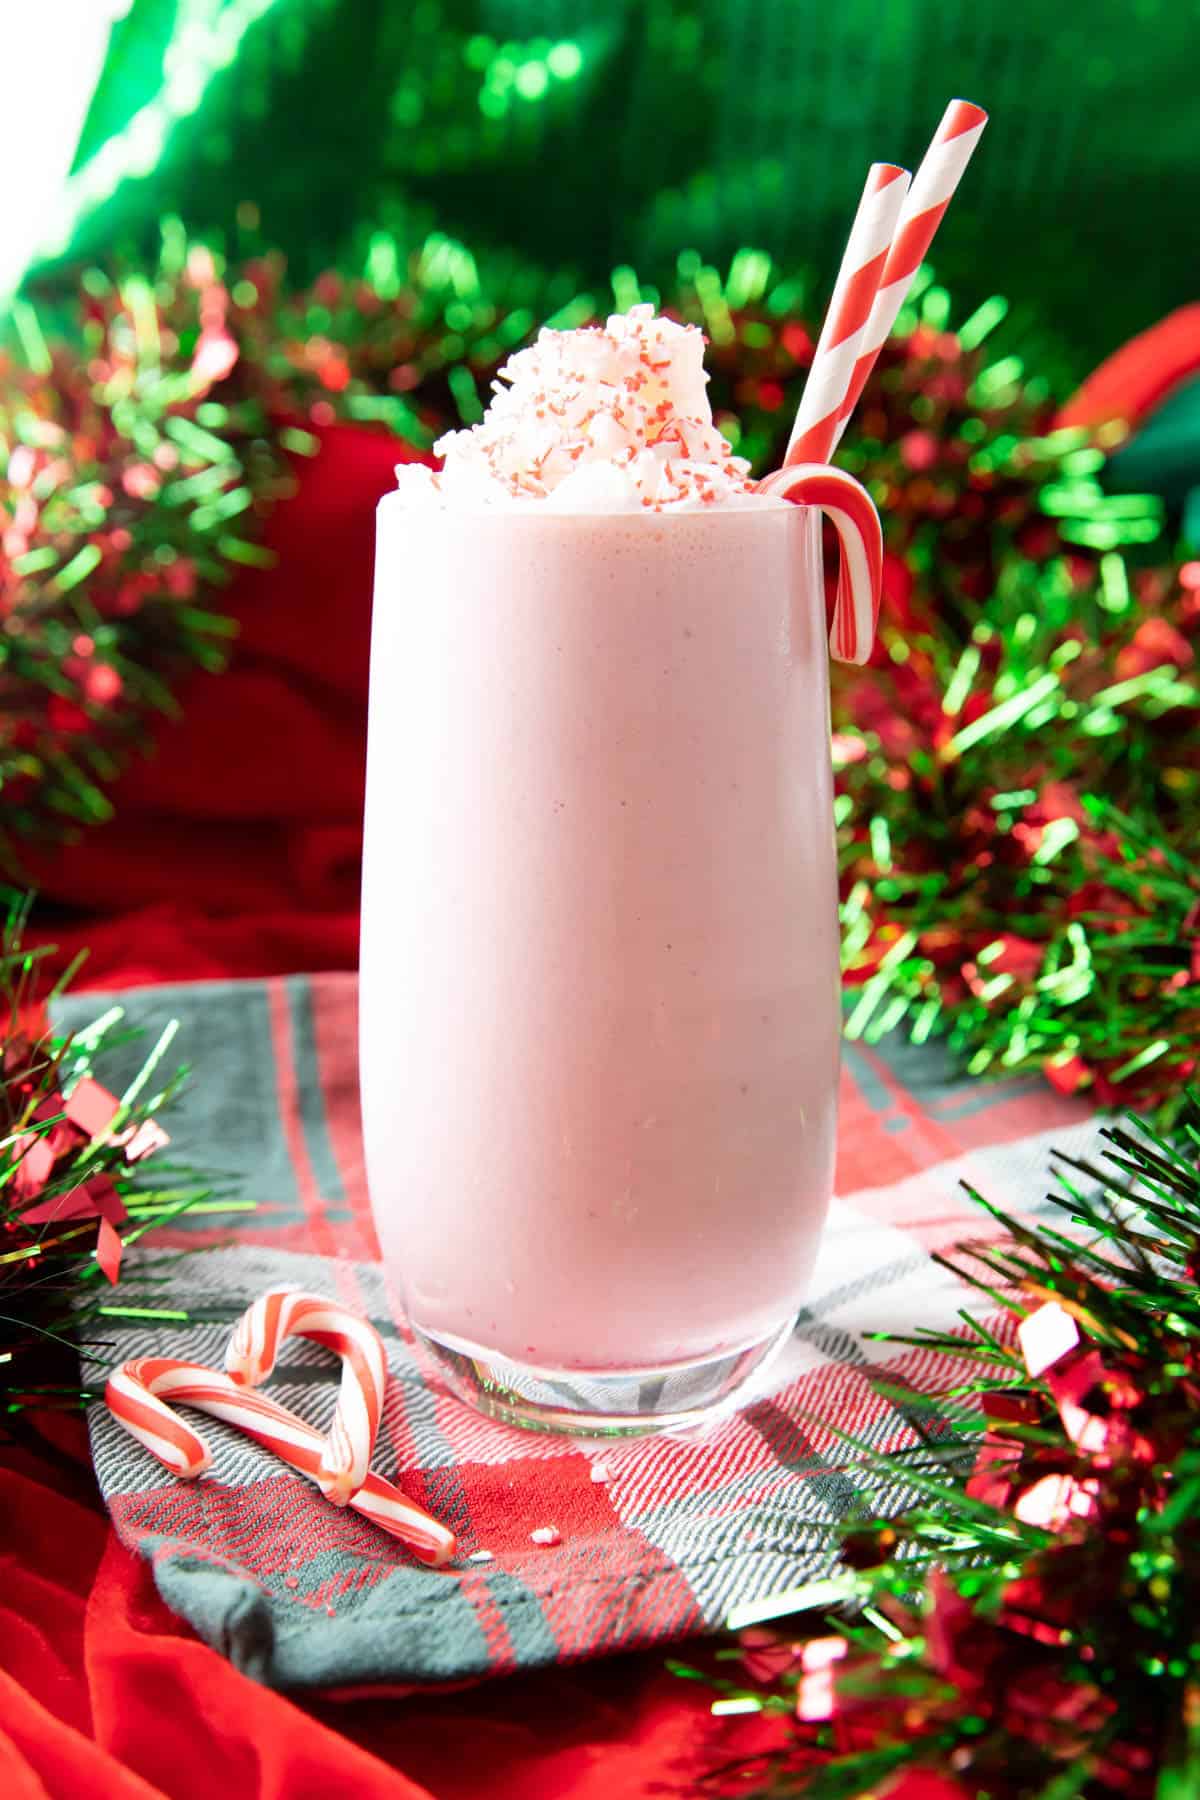 peppermint milkshake against a festive red and green backdrop